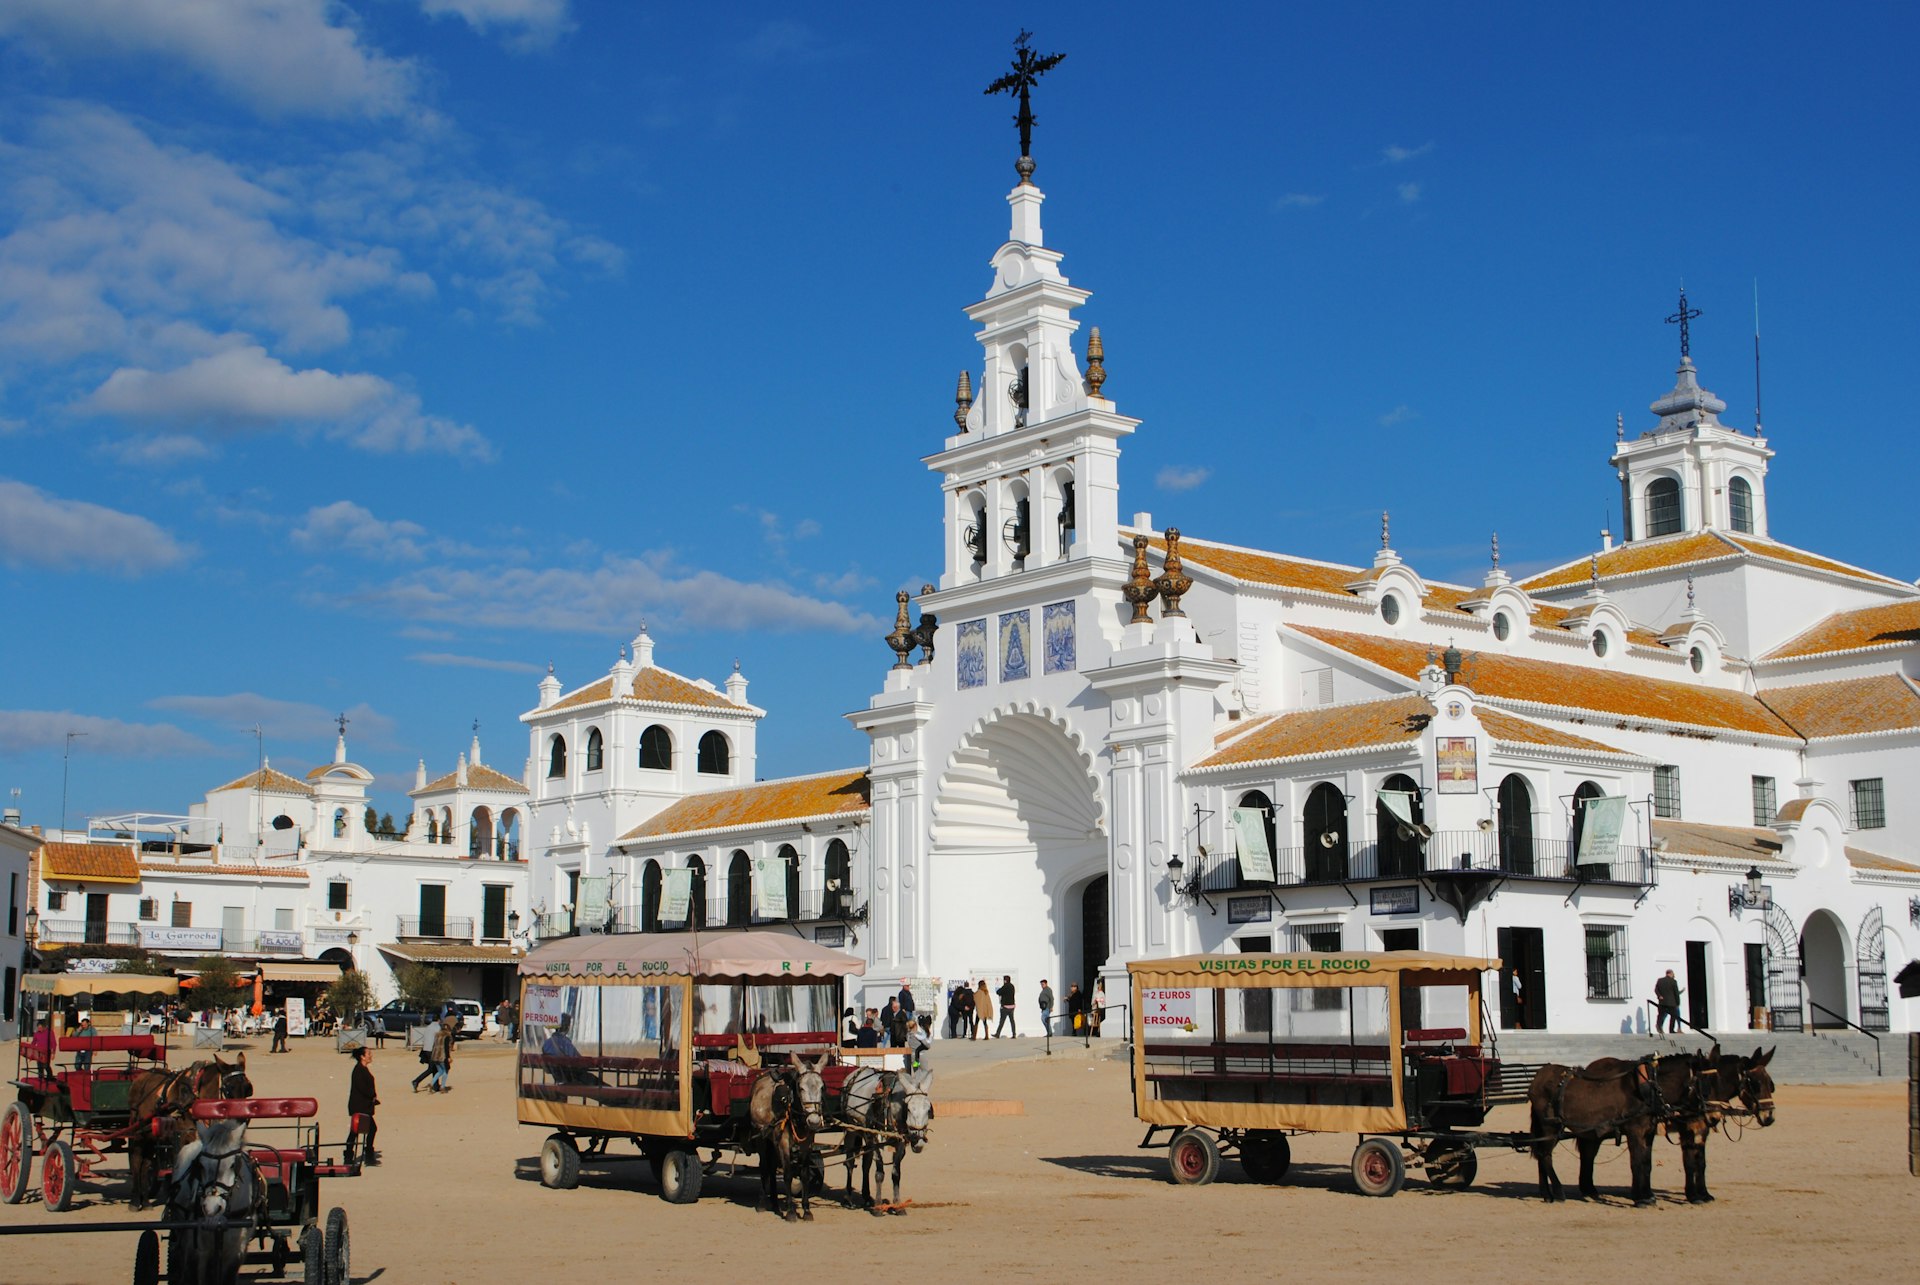 The Ermita del Rocío chapel sits at the heart of El Rocío village on the edge of the Doñana marshes and is the focus of Spain's biggest annual religious pilgrimage, the Romería del Rocío